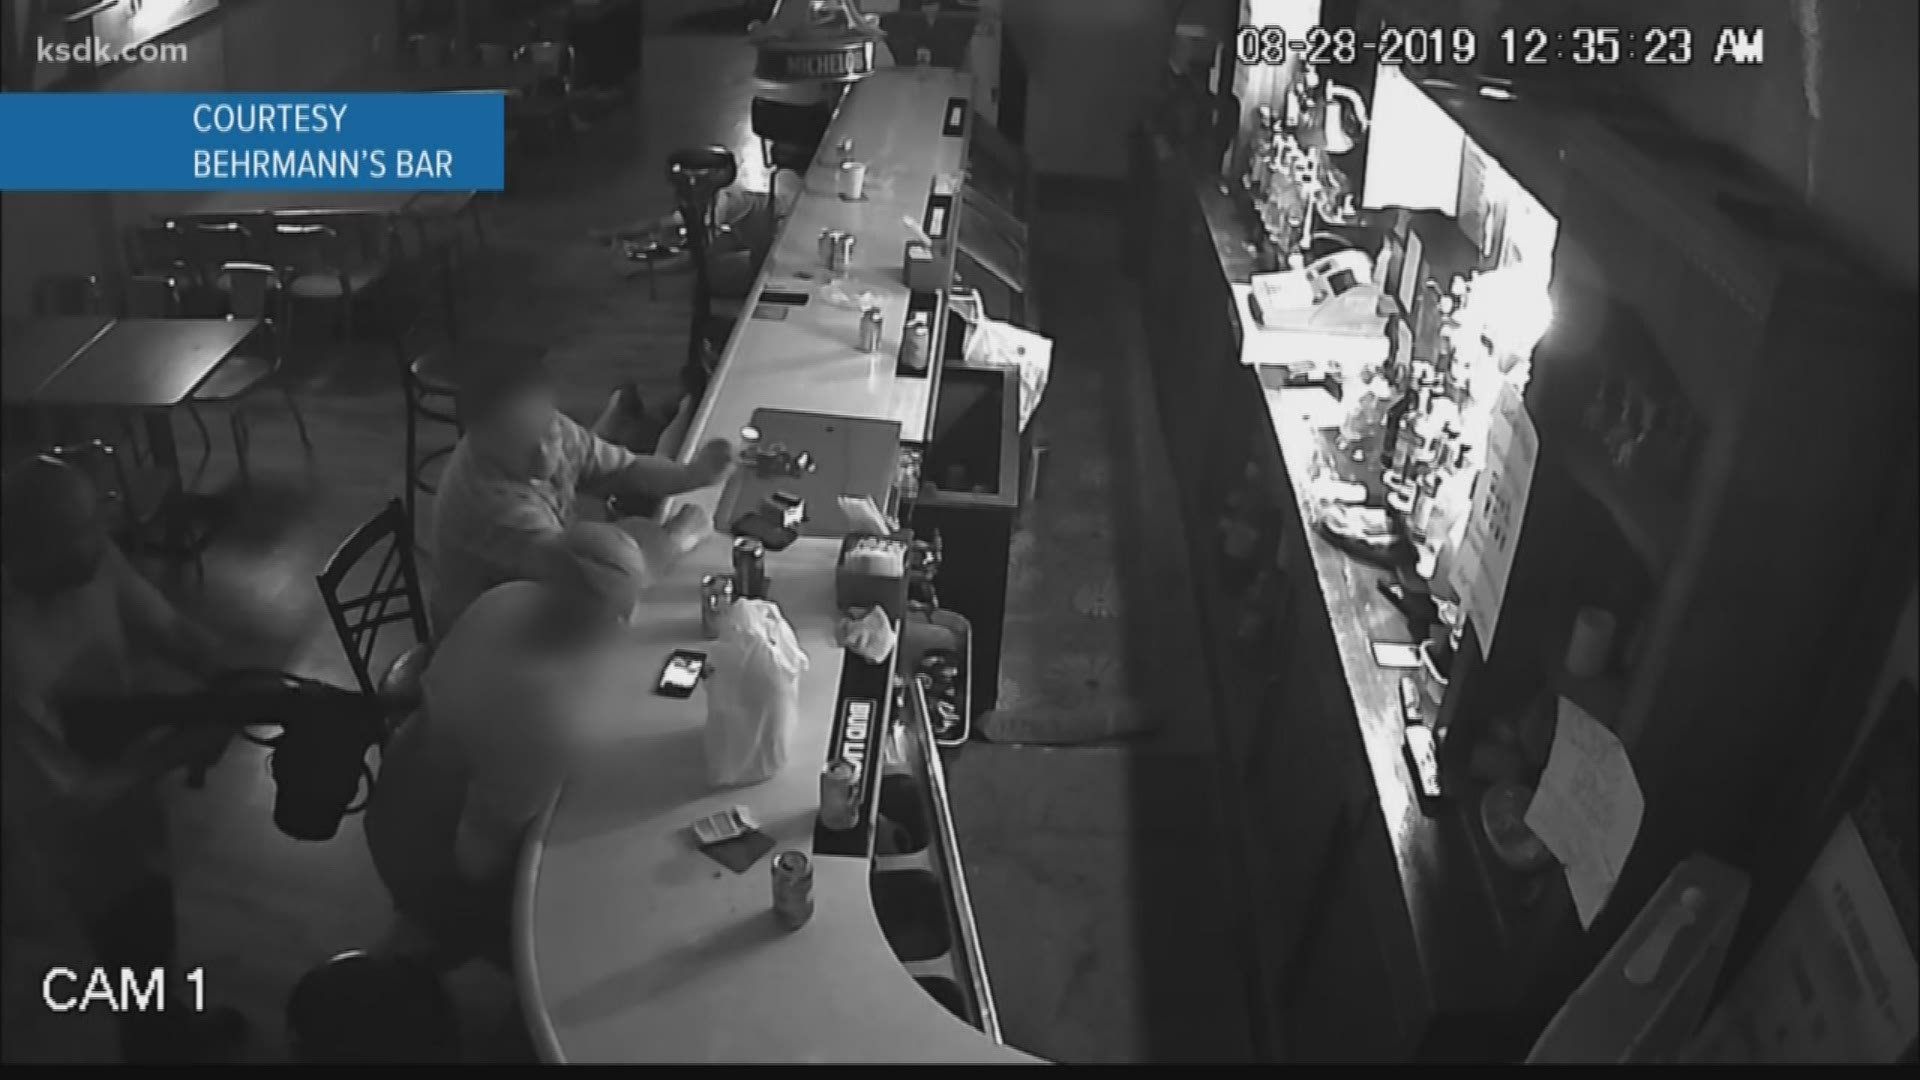 The man had a heavily modified pistol and robbed customers inside Behrmann's Tavern in Dutchtown.